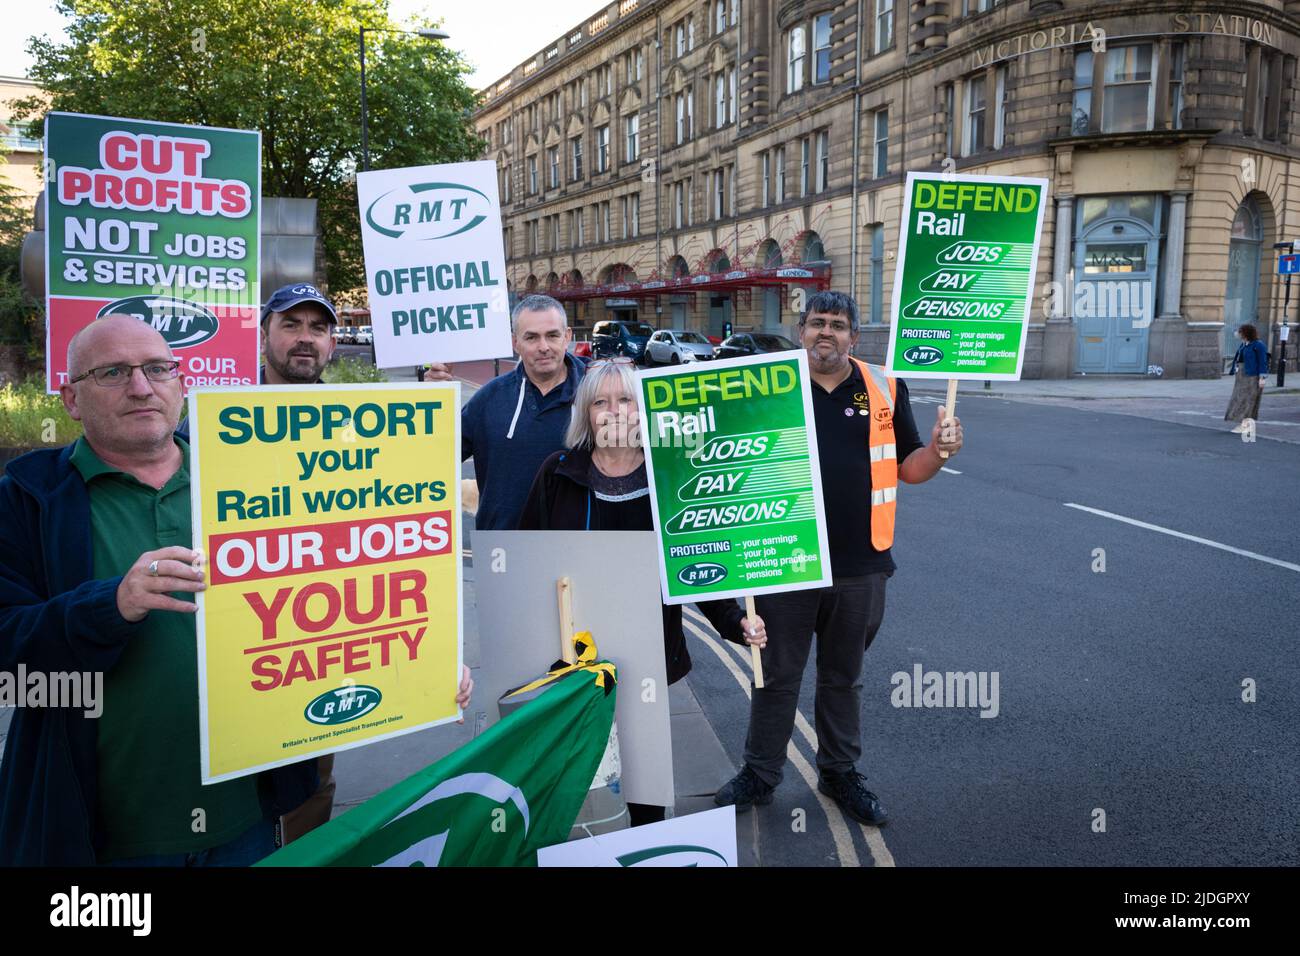 Manchester, UK. 21st June, 2022. Union members and rail workers join the picket line at Victoria train station. The biggest rail strike in over 30 years went ahead after last-minute talks failed. RMT states it has no choice but to strike due to proposed cuts to jobs, pay and pensions. Credit: Andy Barton/Alamy Live News Stock Photo